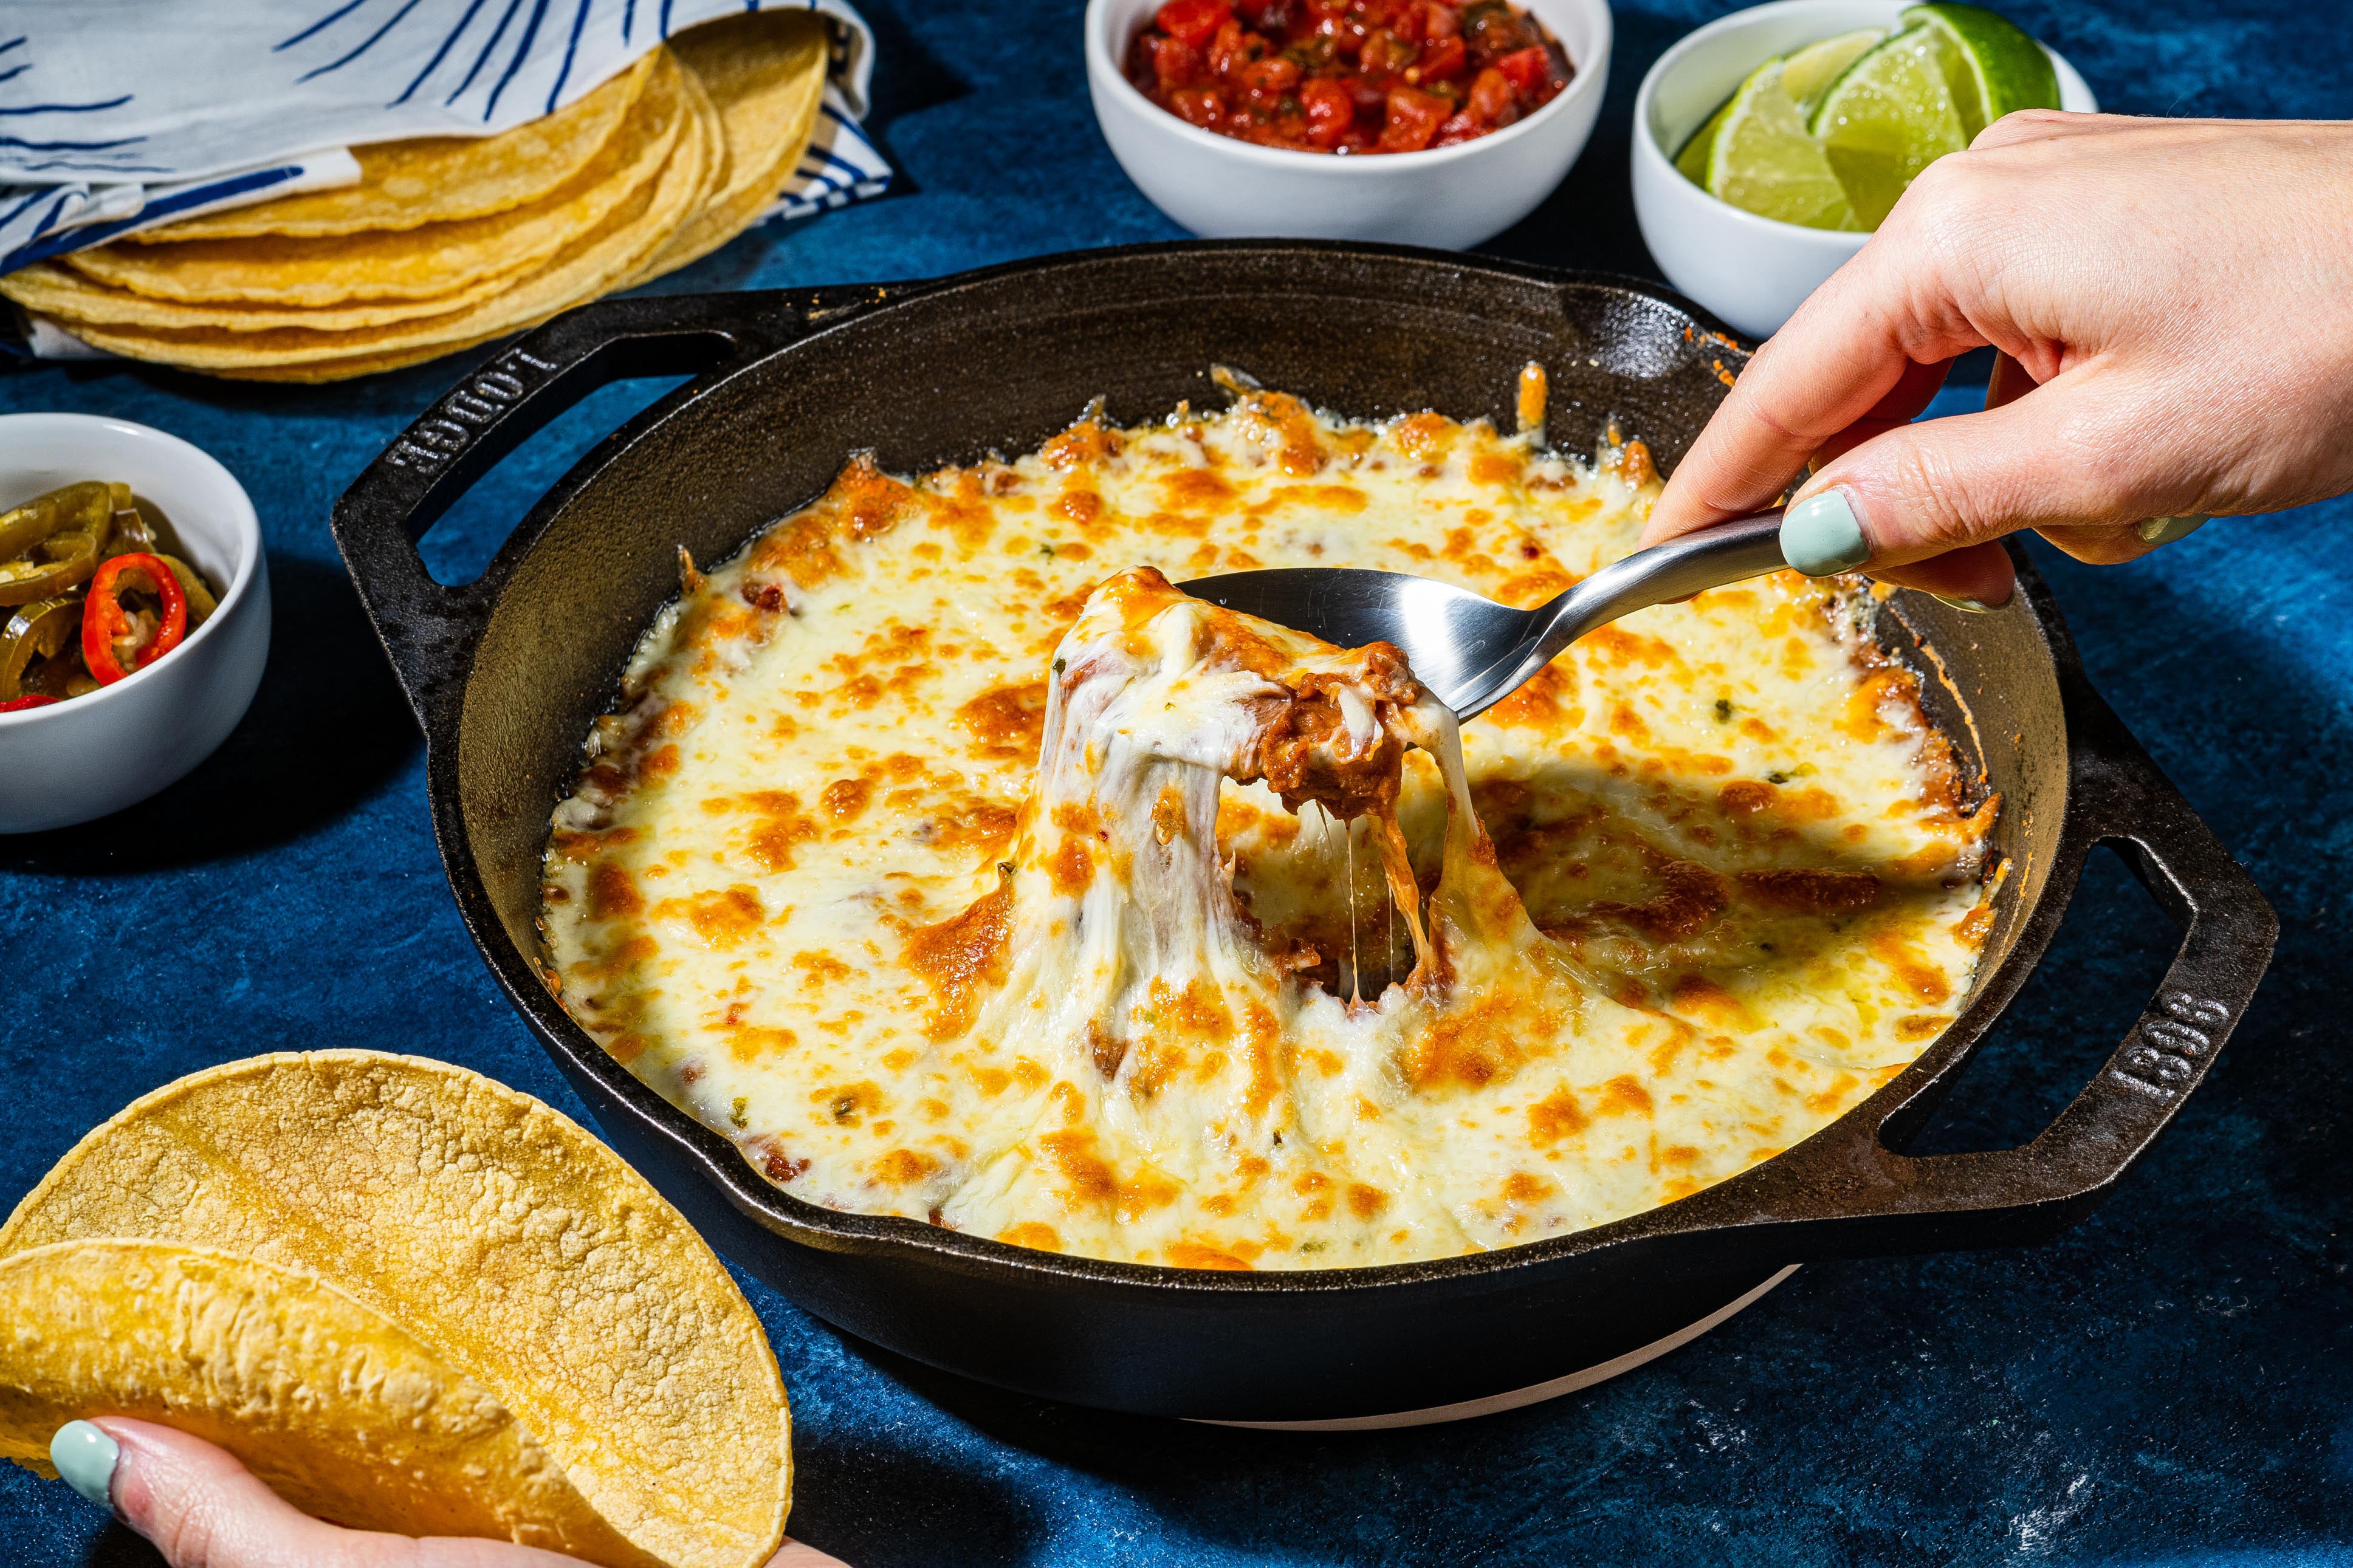 Gather family or friends around the table for this cheesy skillet